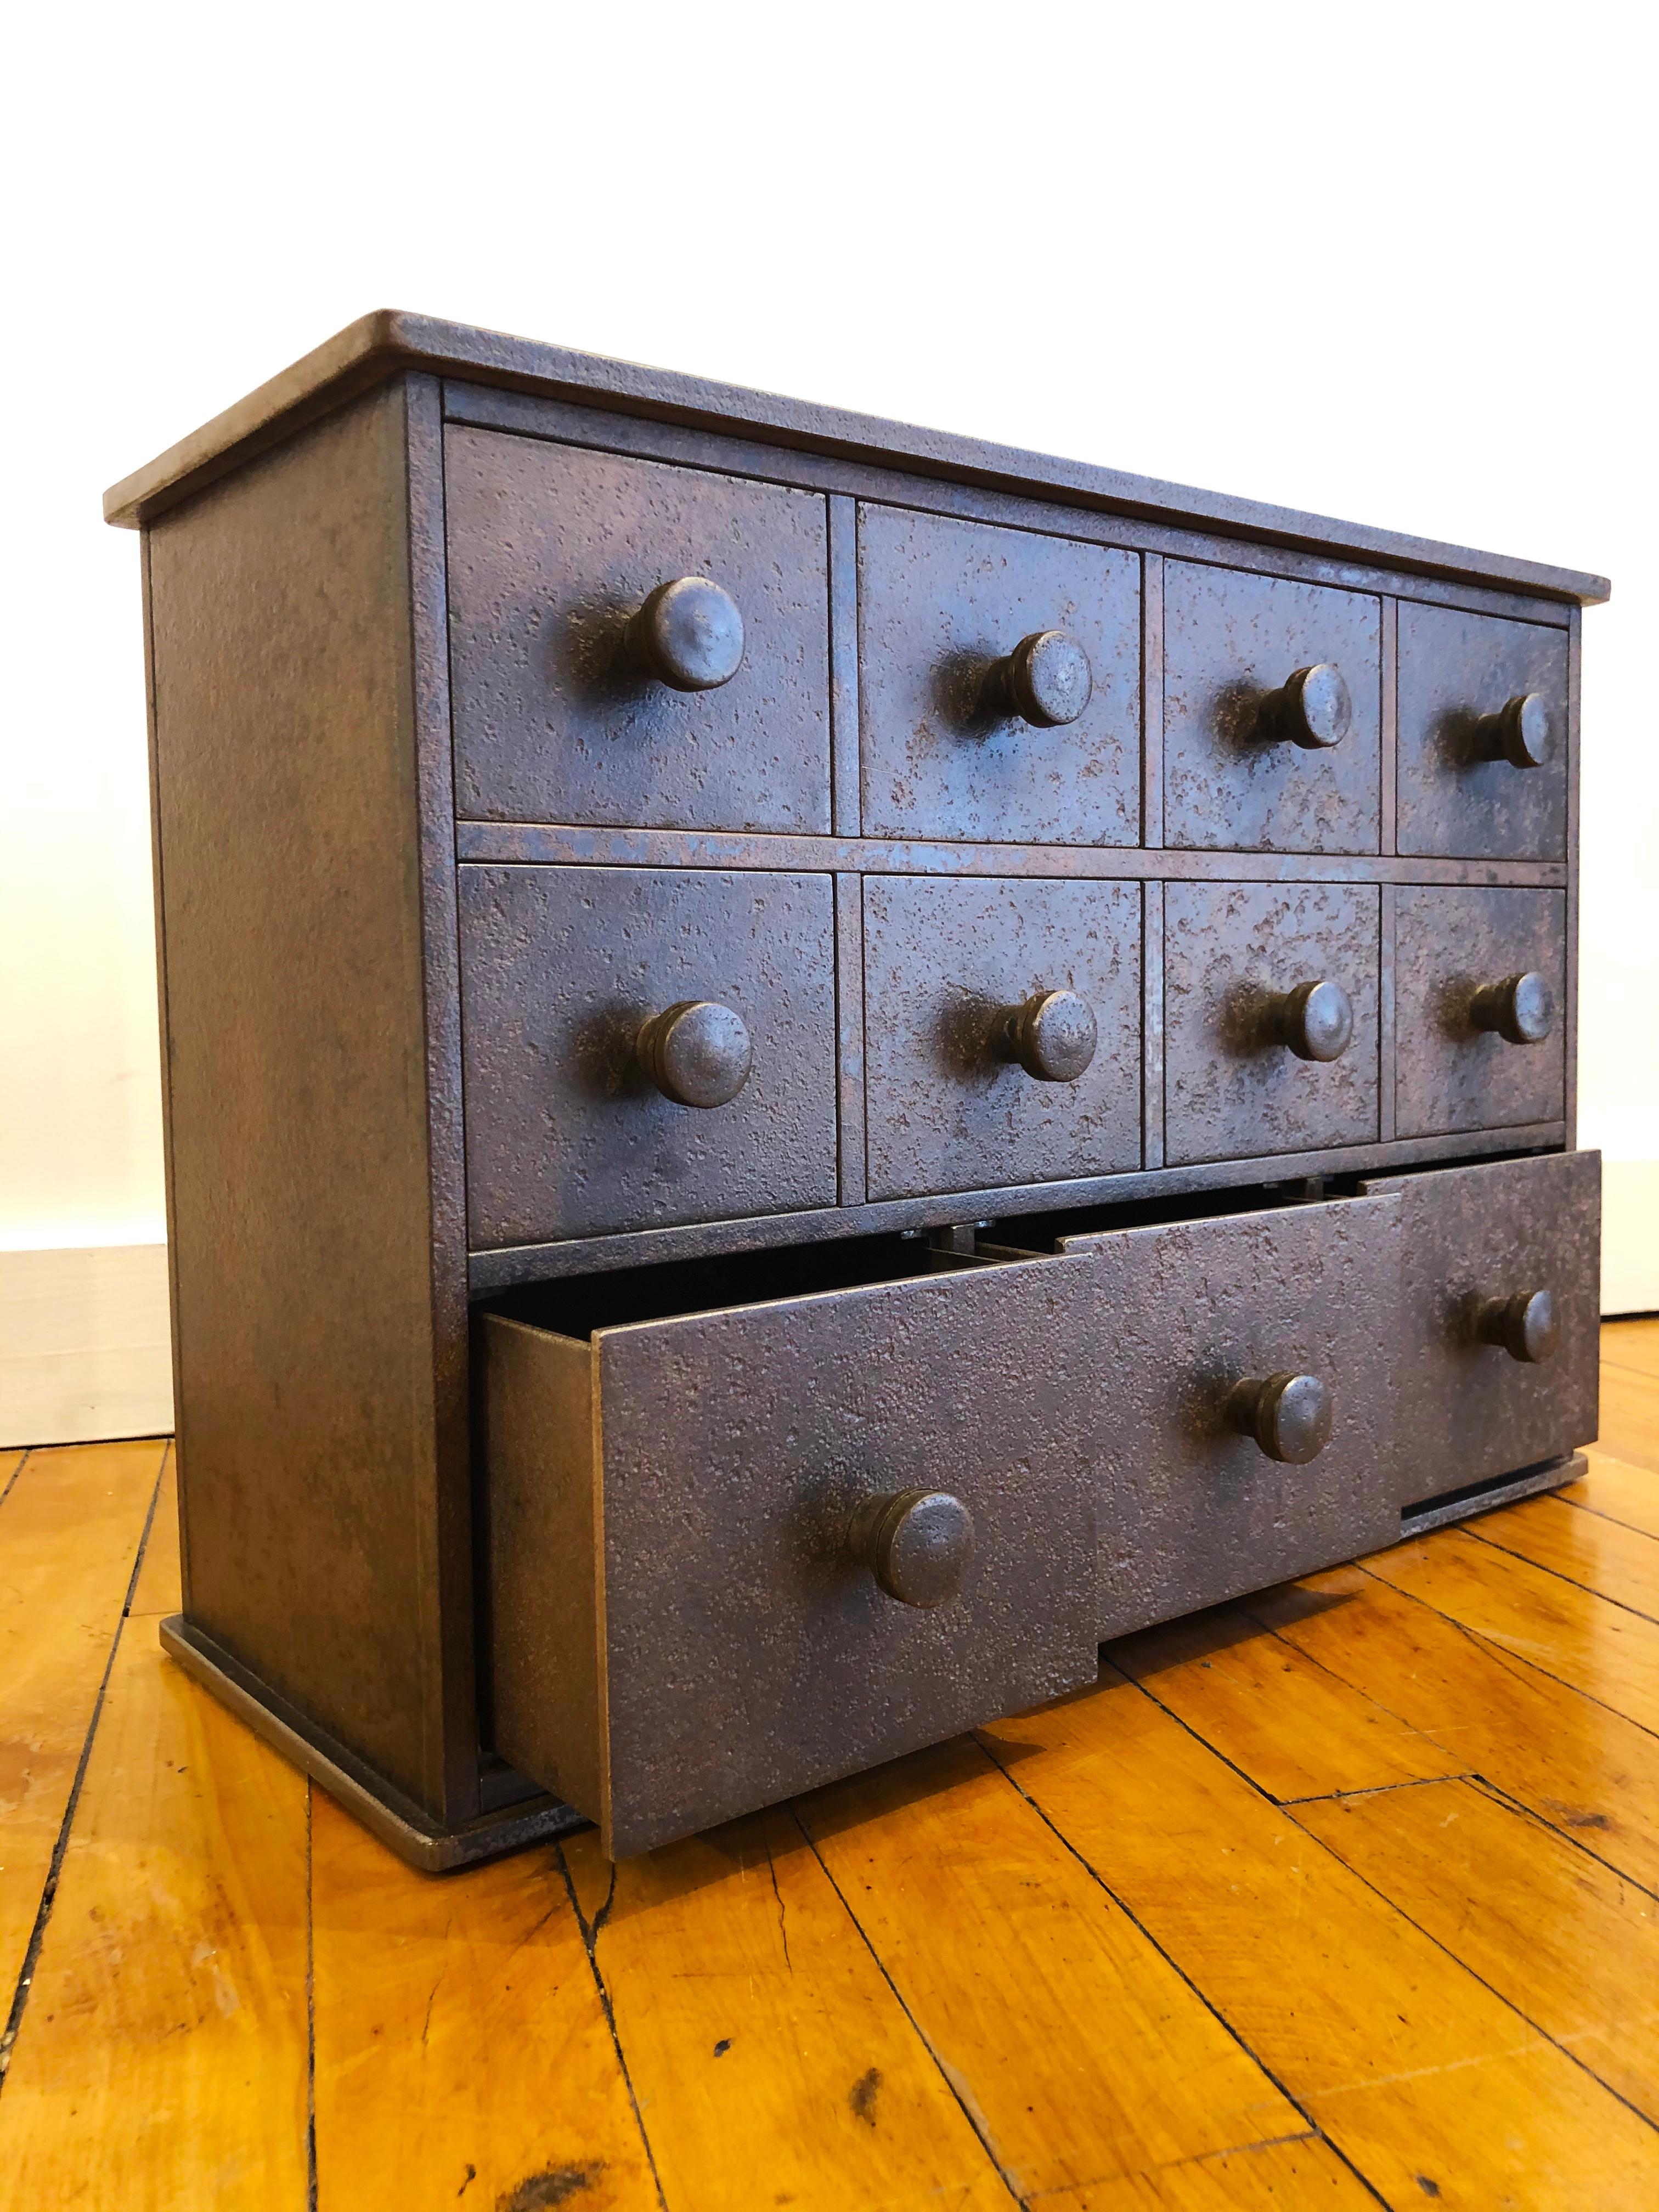 Folk Art Jim Rose Legacy Collection - 11 Drawer Cabinet, Shaker Inspired Steel Apothecary